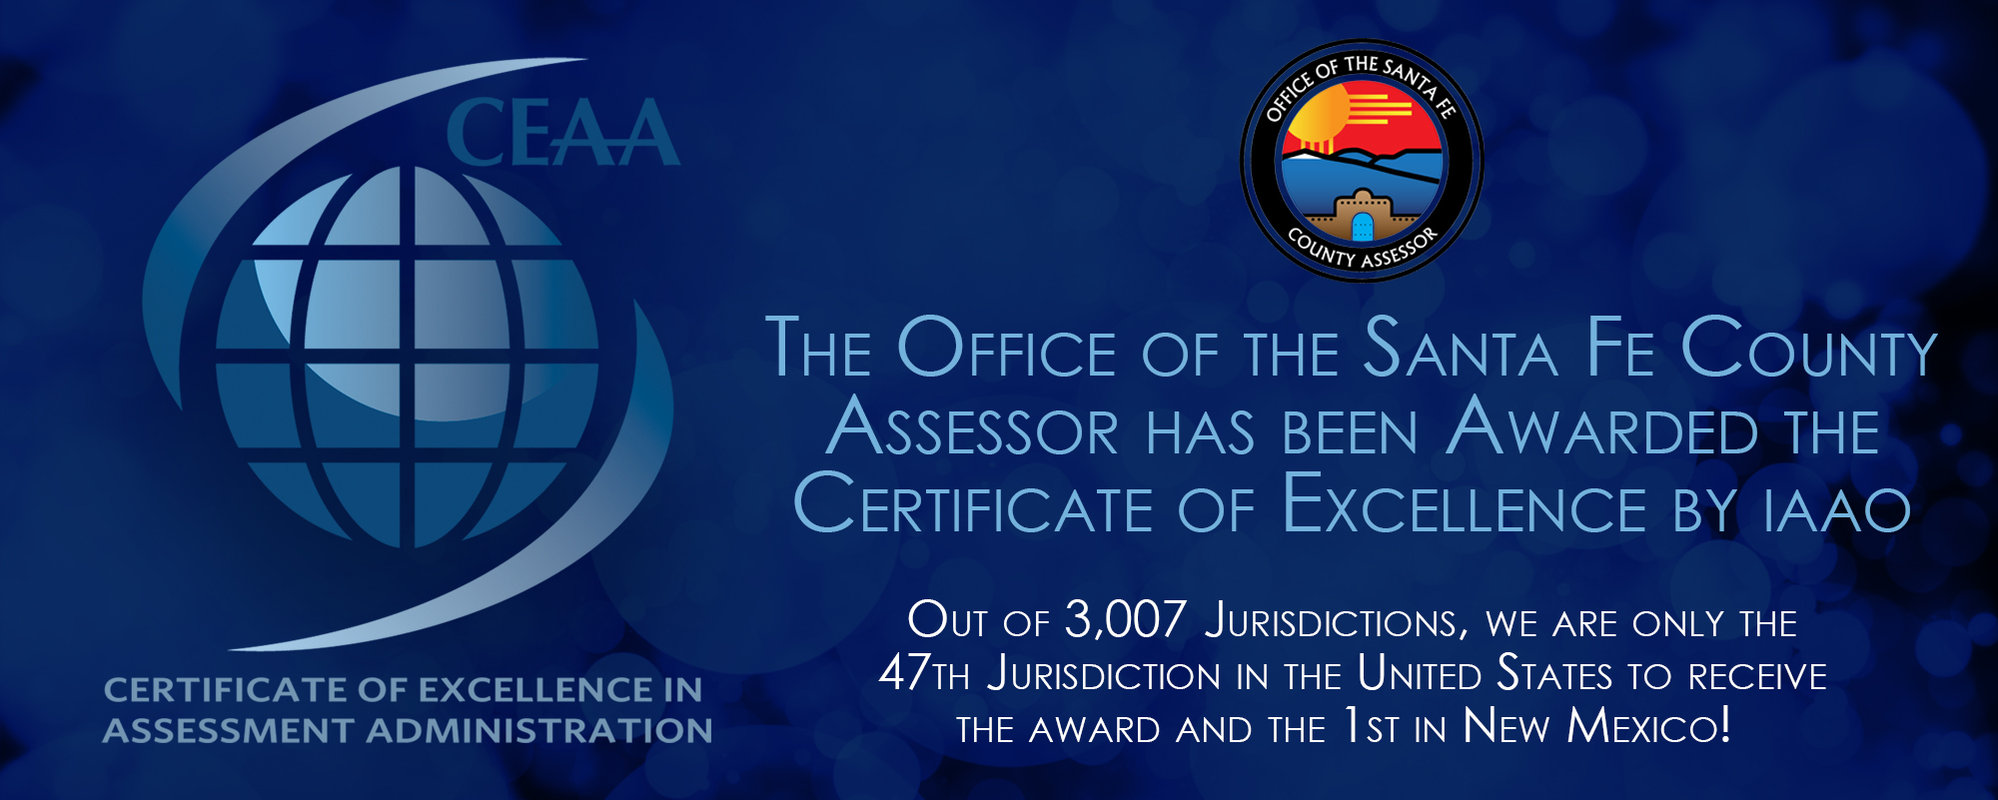 Certificate of Excellence in Assessment Administration